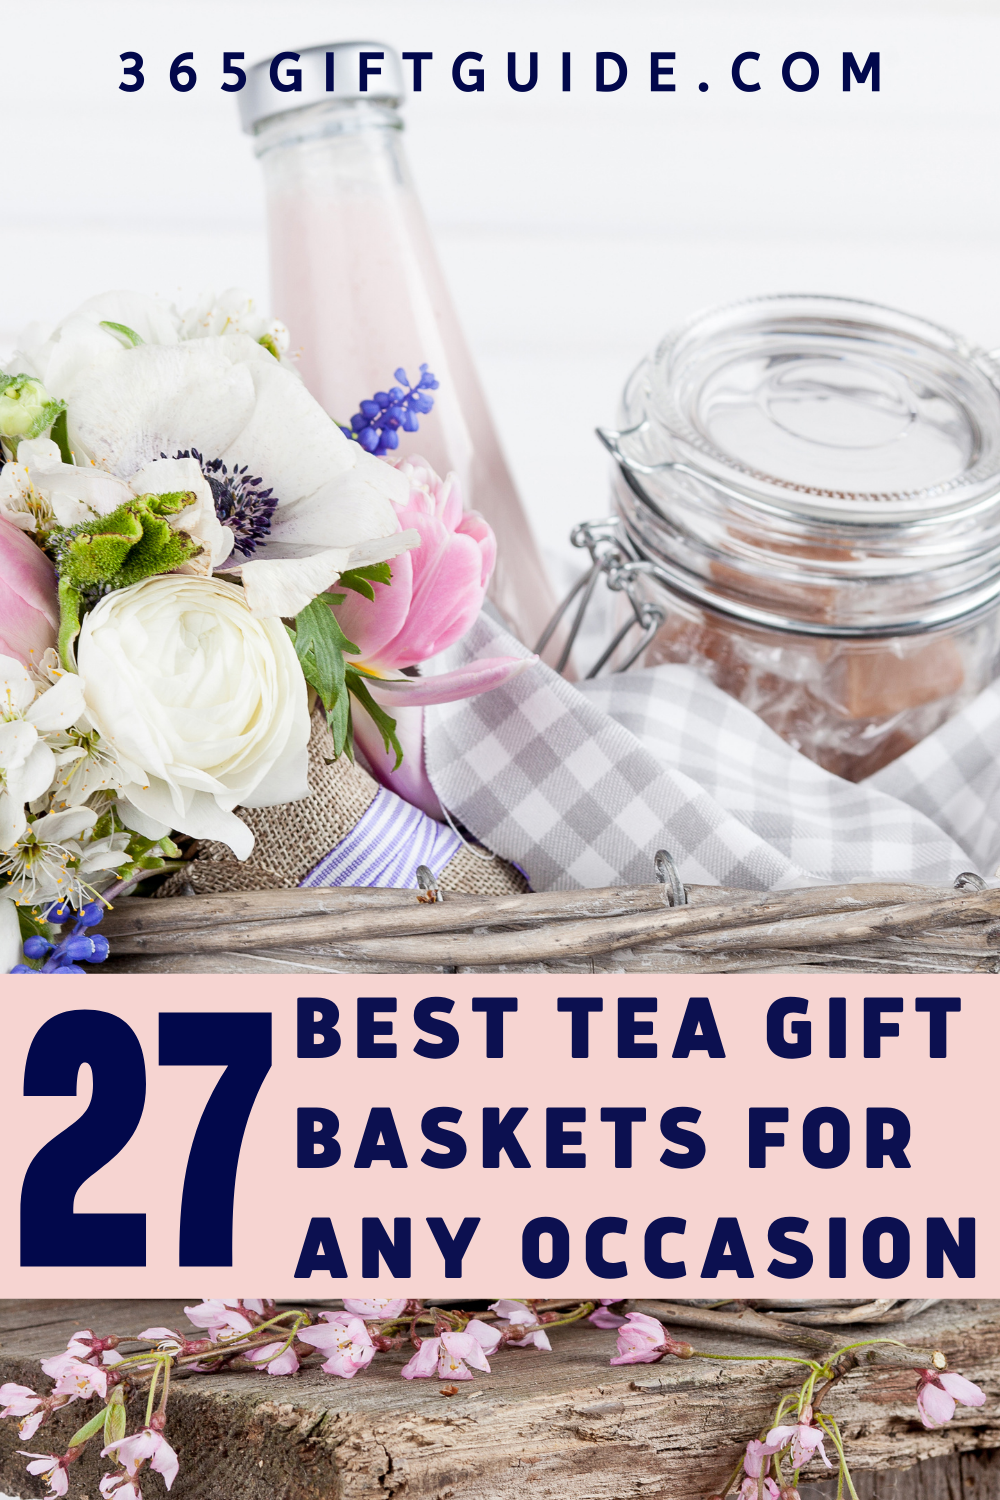 27 Best Tea Gift Baskets for Any Occasion